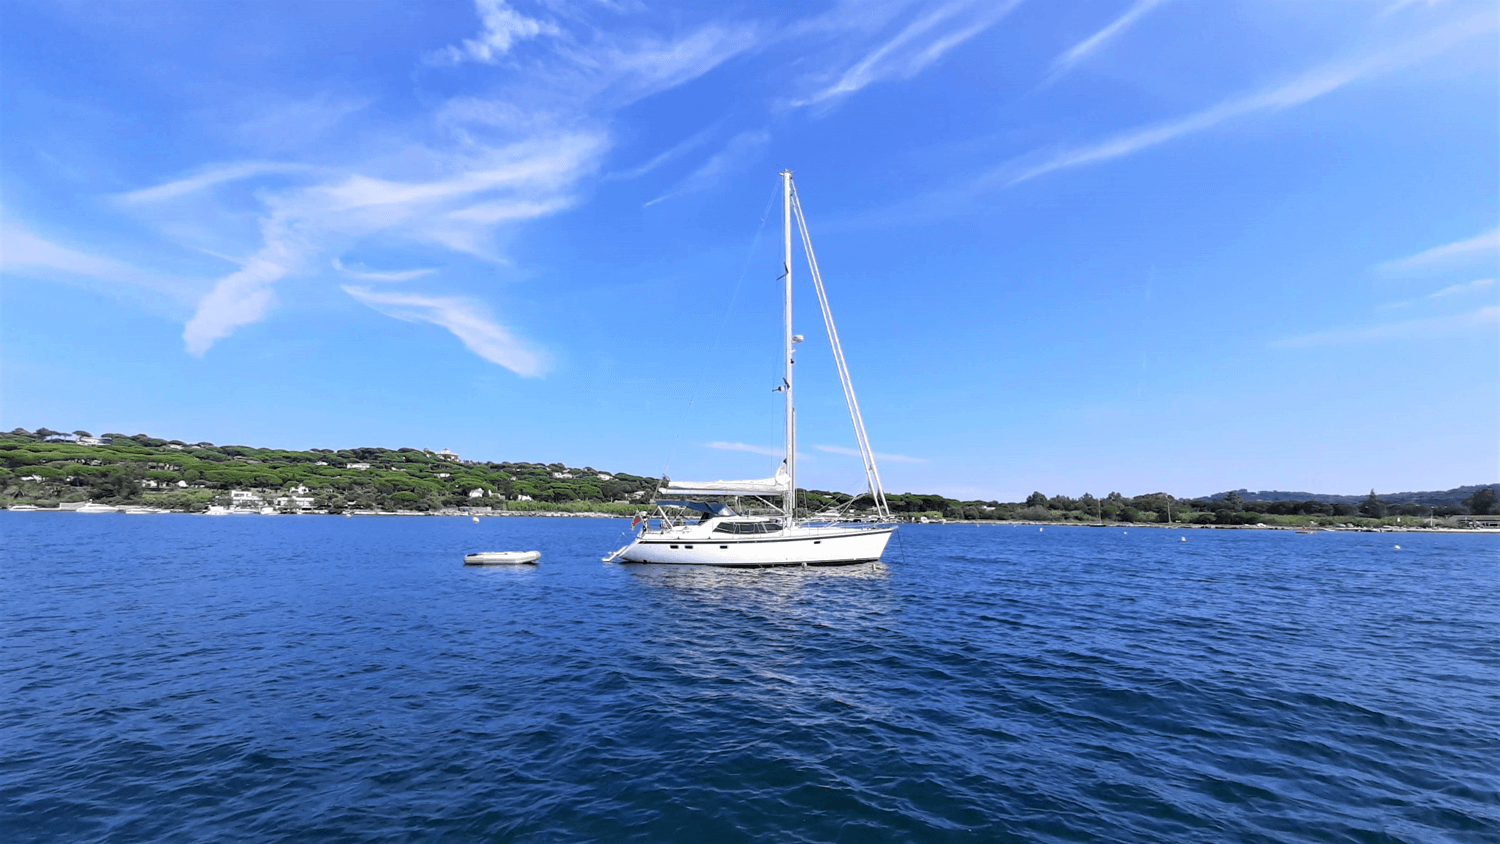 Charter a Luxury Yacht or choose a Luxury Villa Rental St. Tropez and experience the beautiful coastline of the Cote d'Azur.